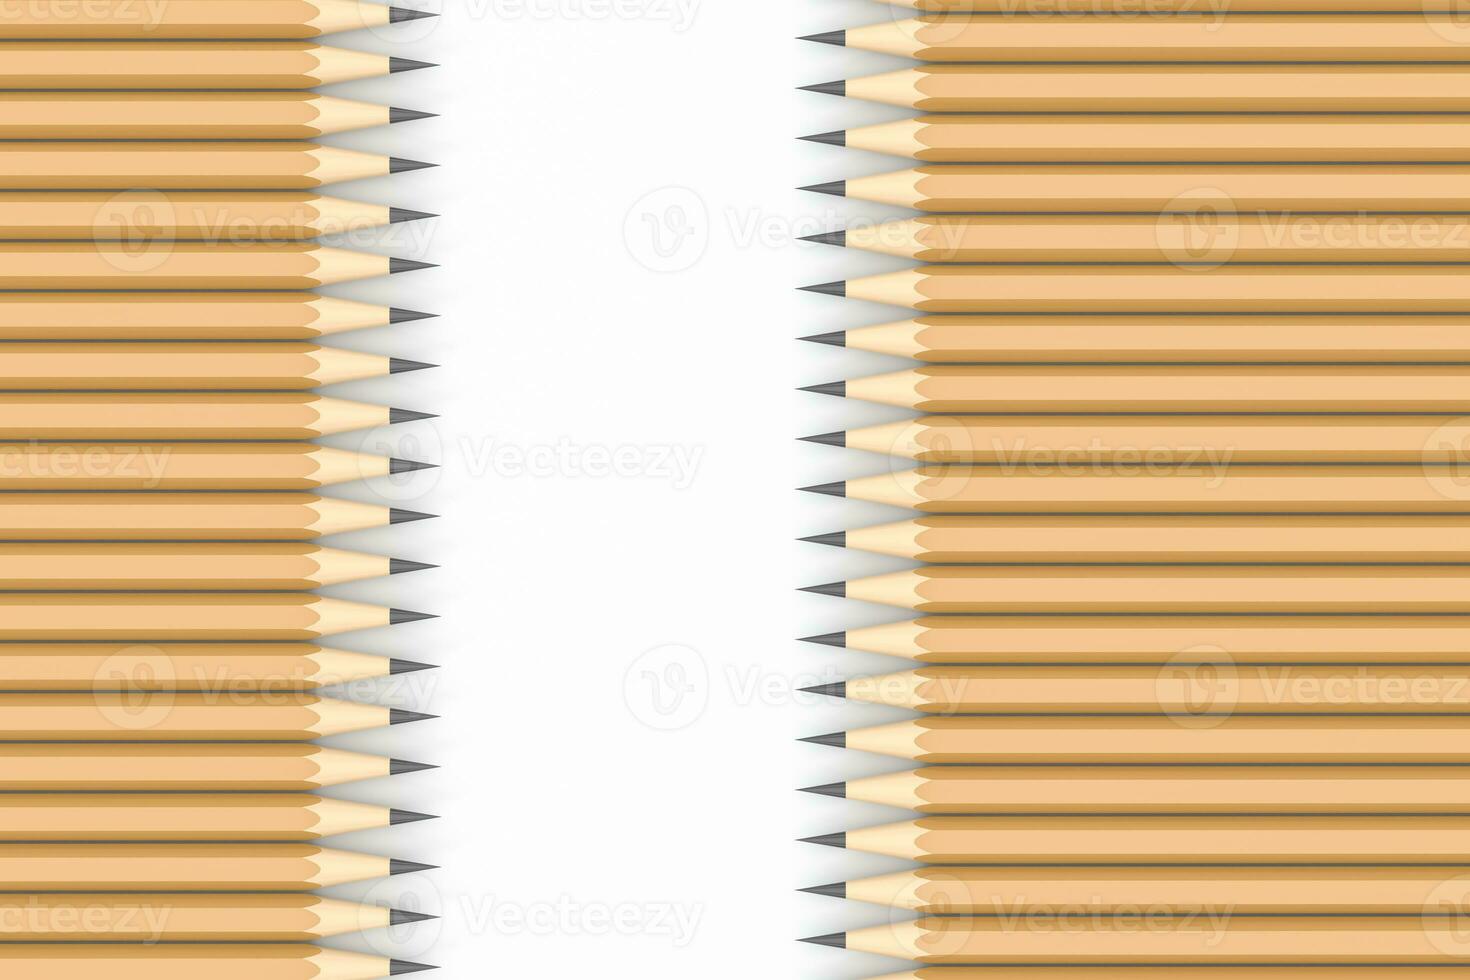 Pencils in a row with white background, 3d rendering. photo